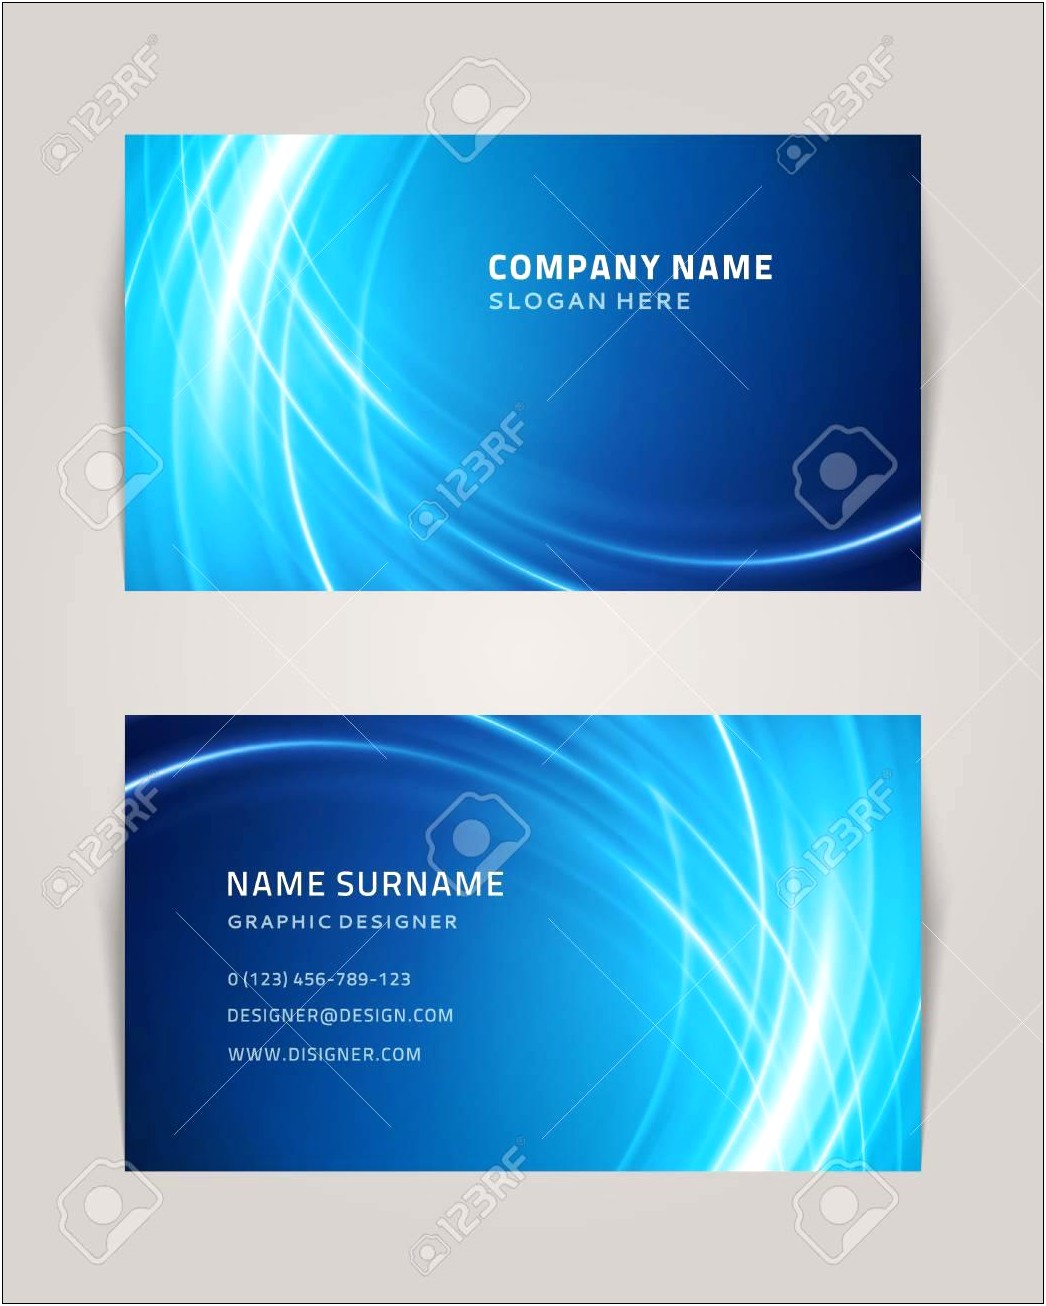 Free Business Card Wave Design Templates